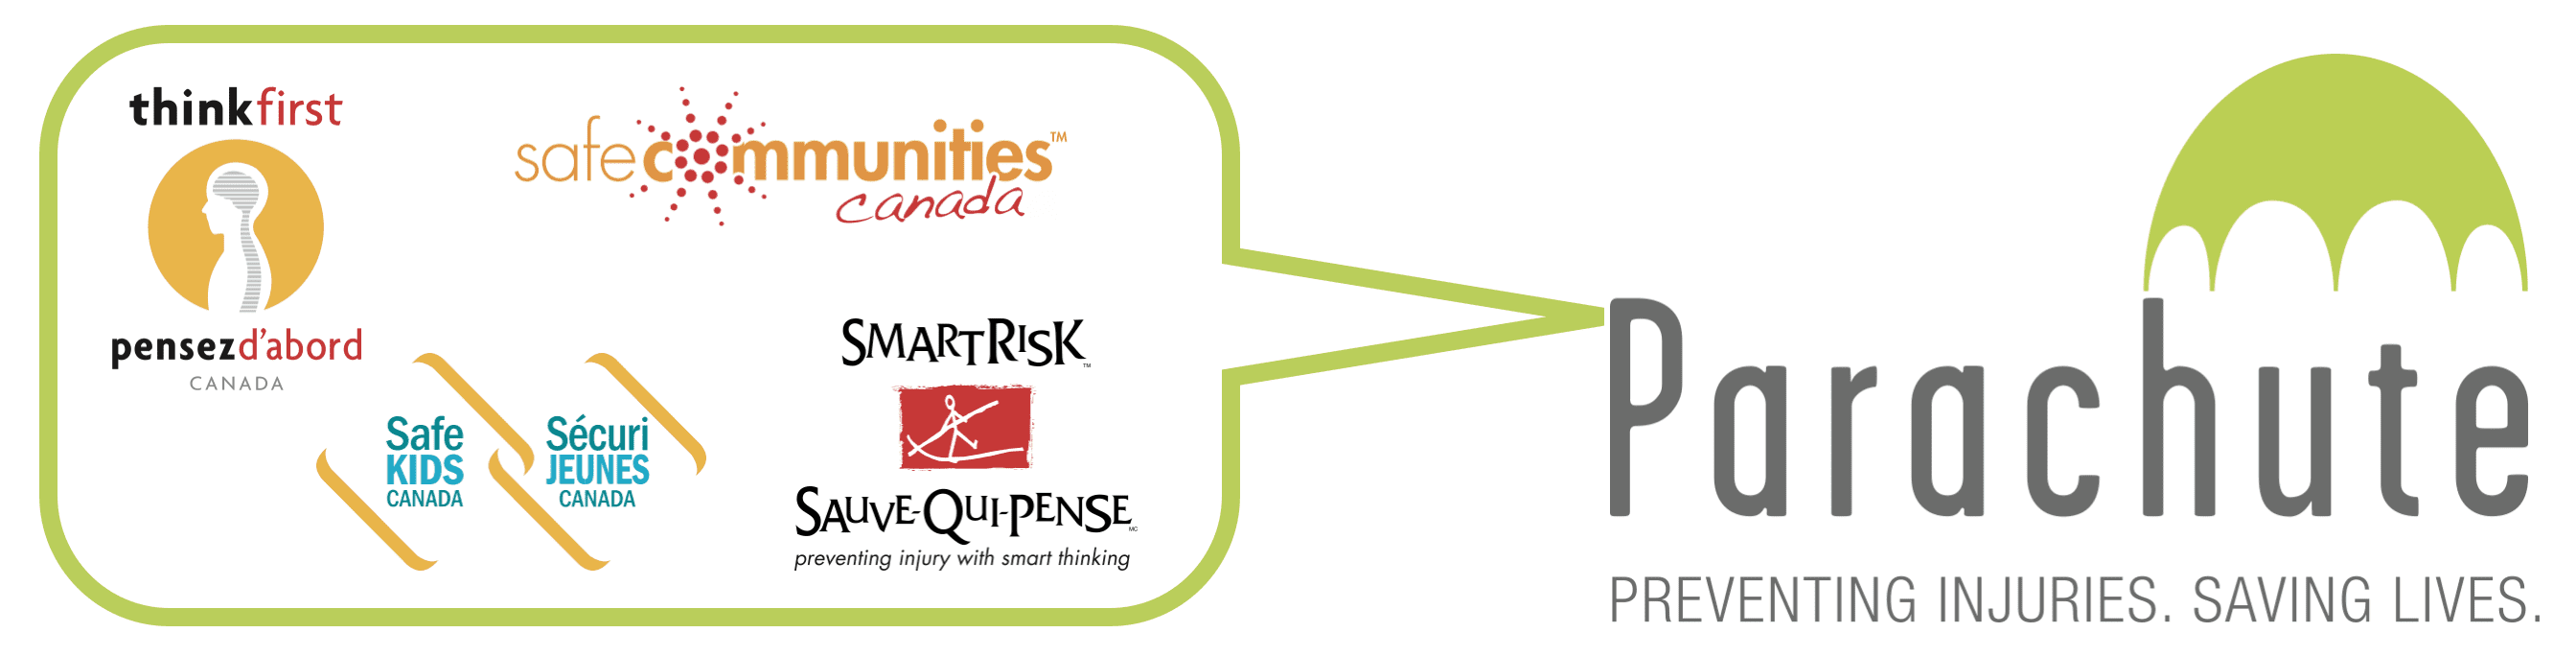 Image has a white background with Parachute's logo on the right. On the left is a rectangular shape that has the logos of think first, safe communities canada, smart risk, and safe kids canada.